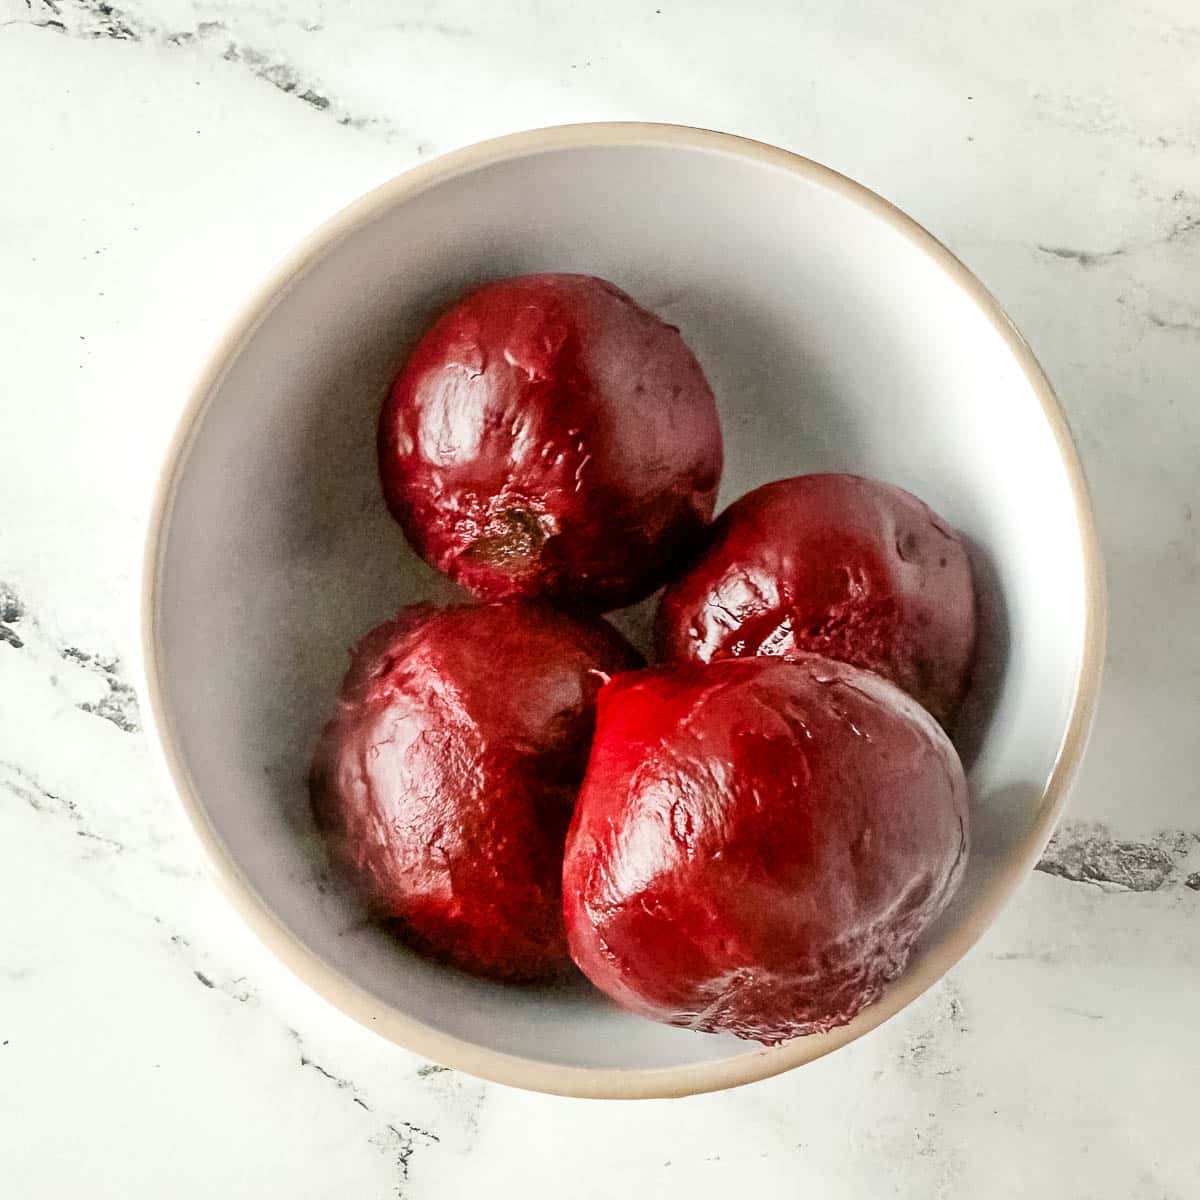 cooked beets with their skin removed in a white bowl.